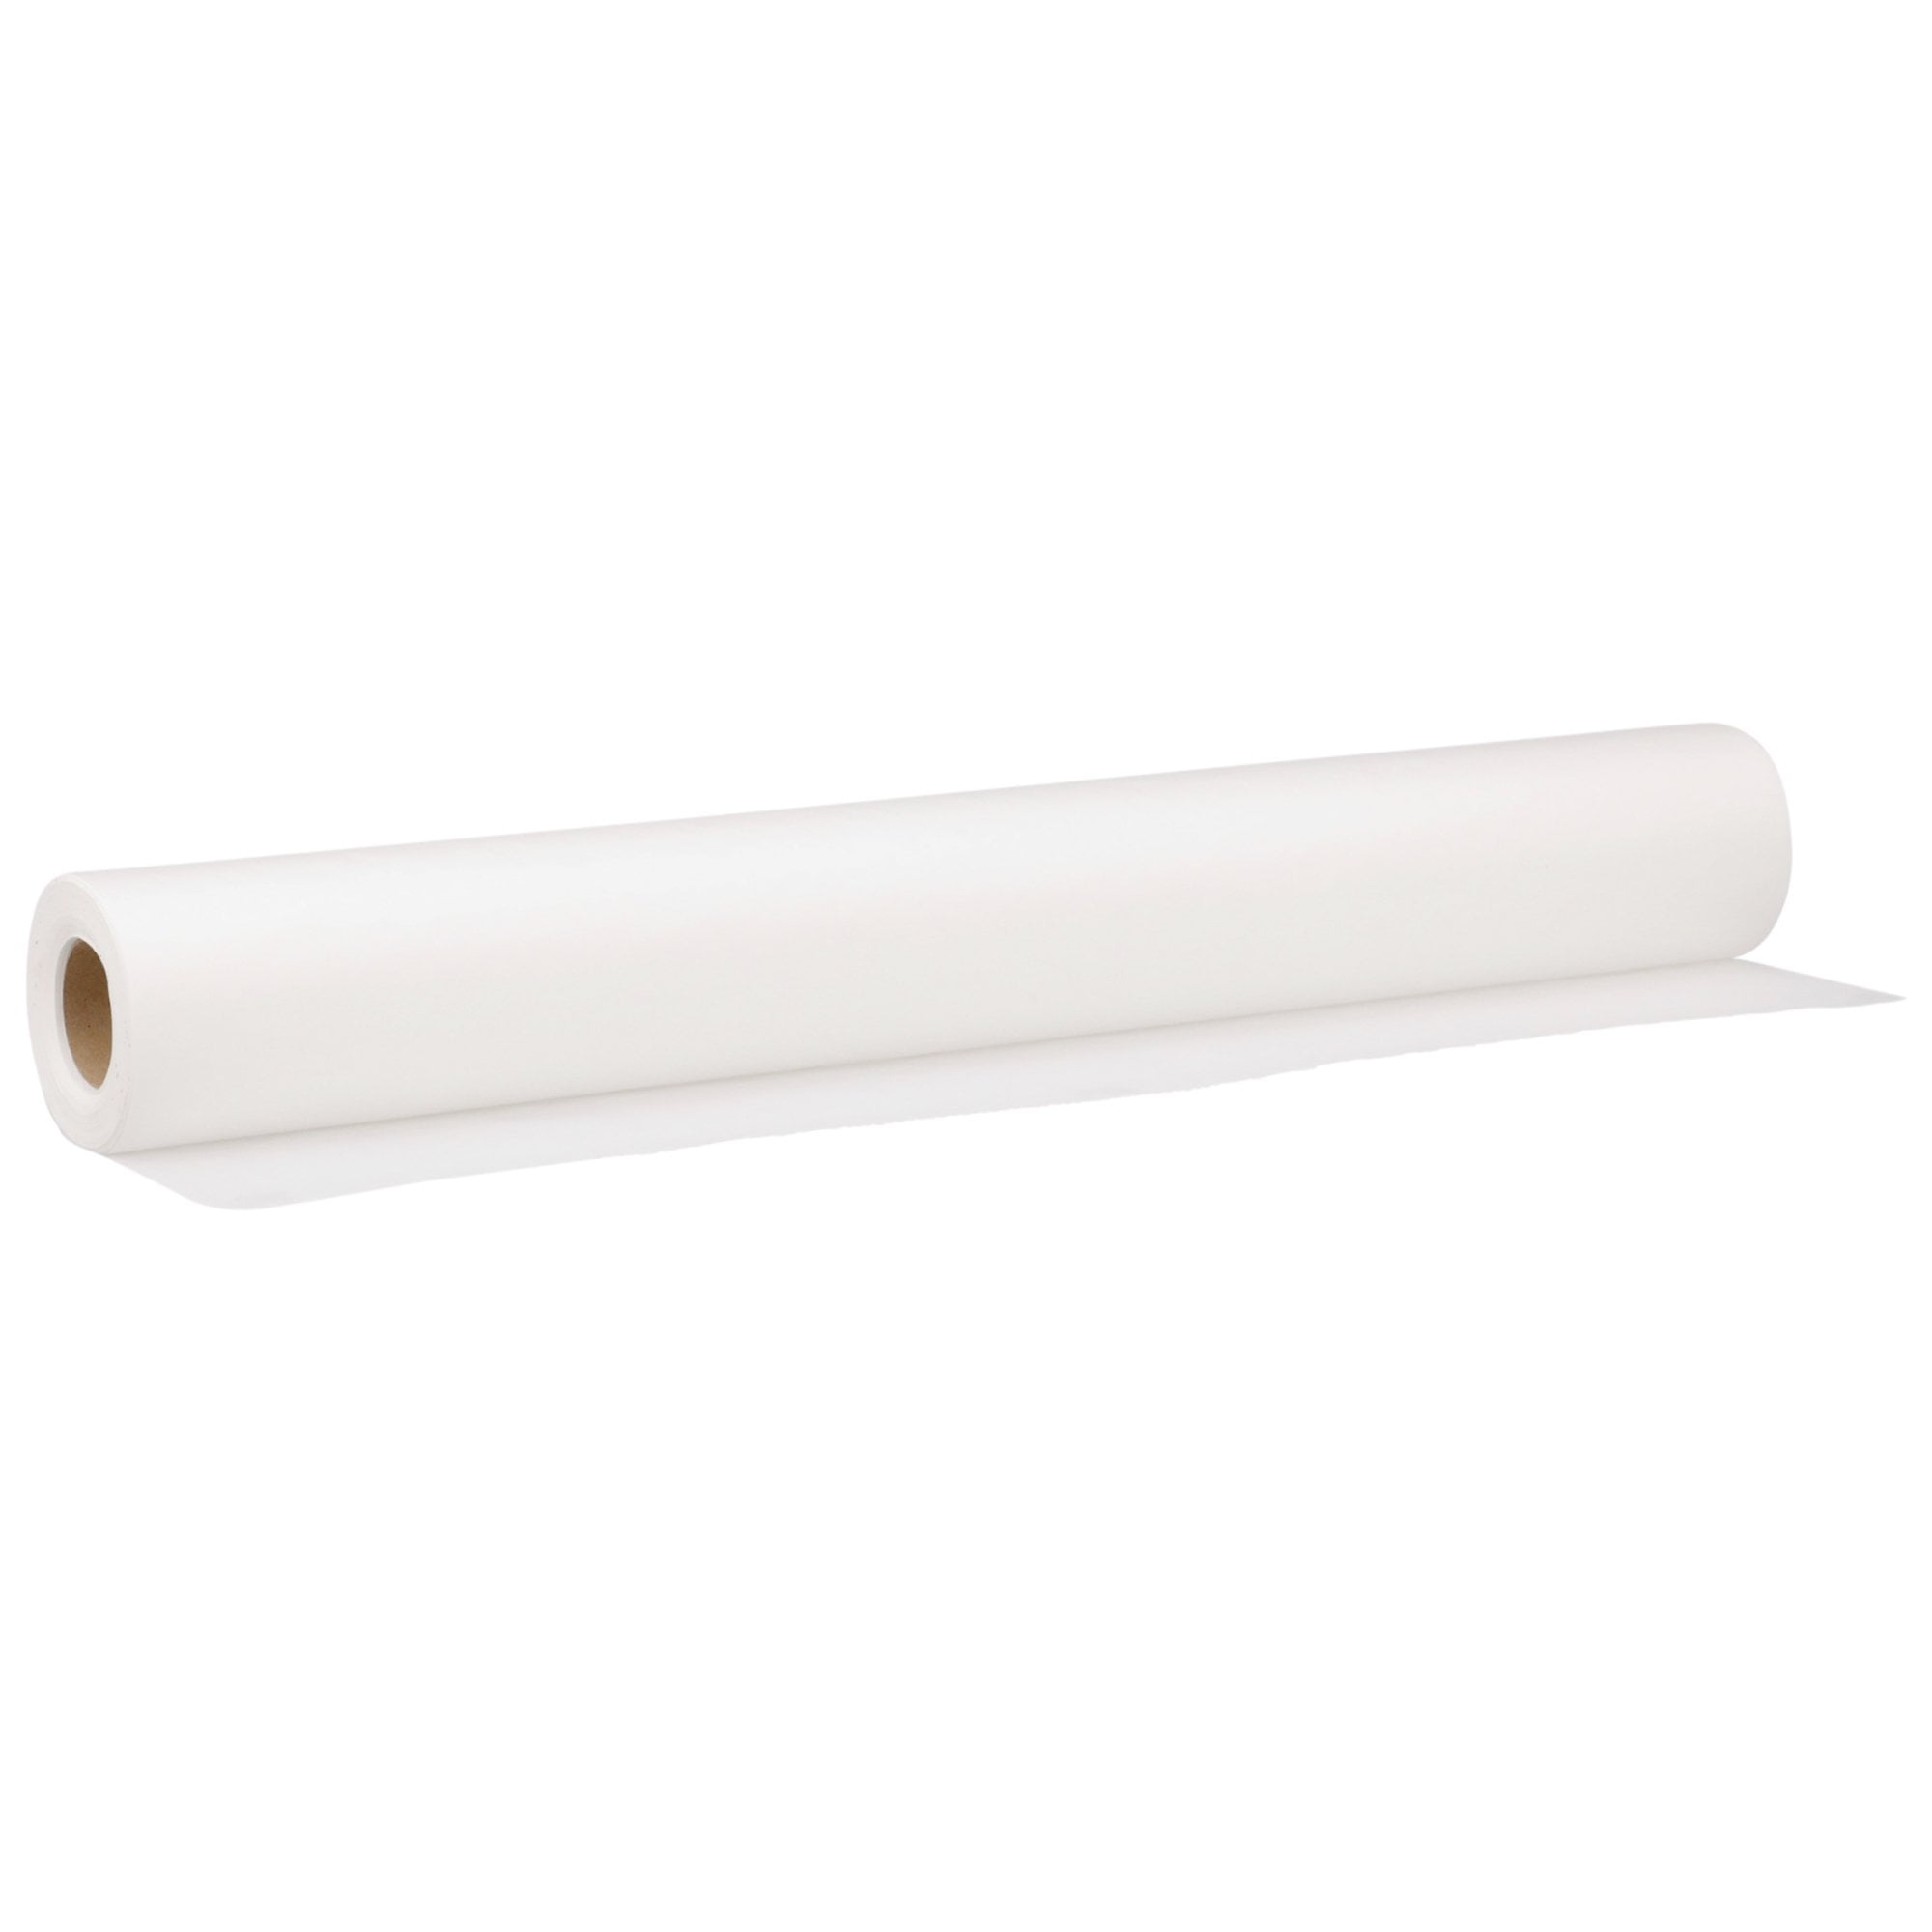 Table Paper Roll Smooth Texture 21X225 Inch (12/Case) - Salon Shack